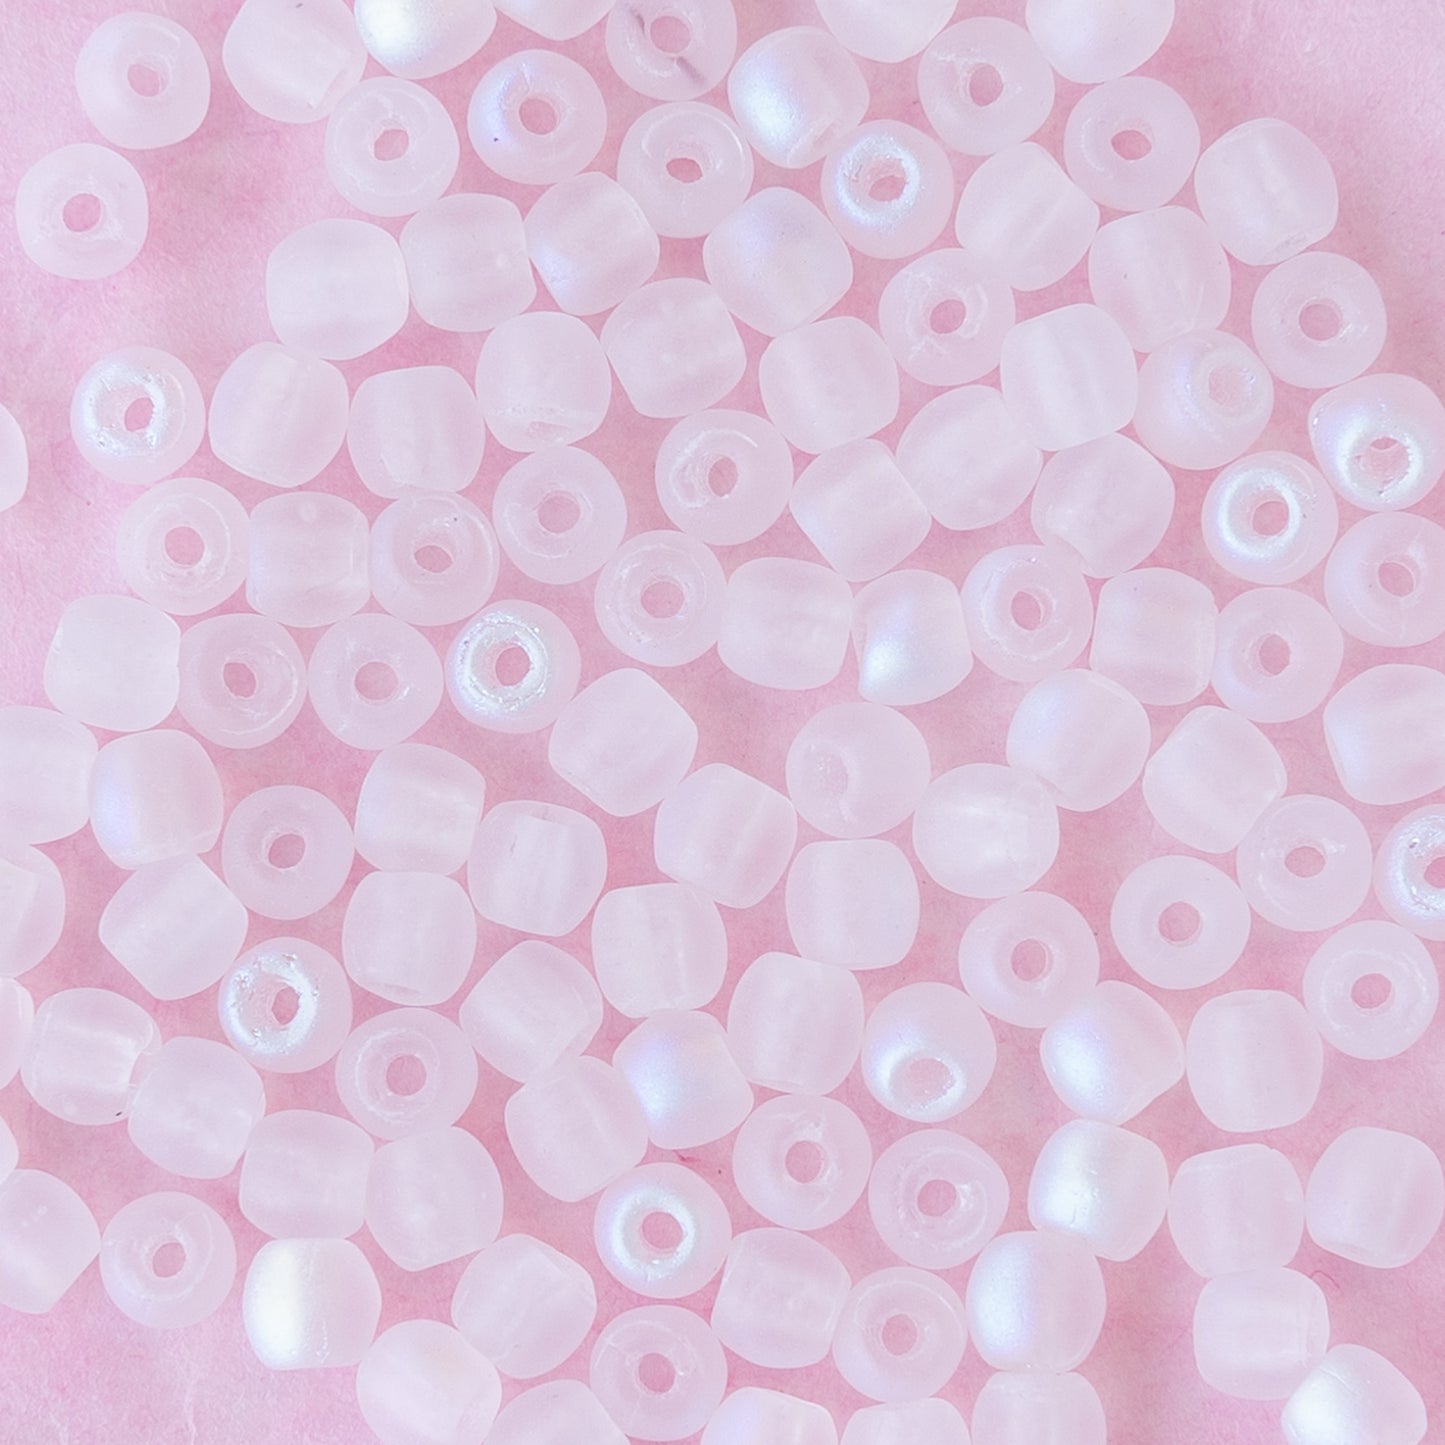 3mm Round Glass Beads - Matte Crystal AB  - 100 Beads